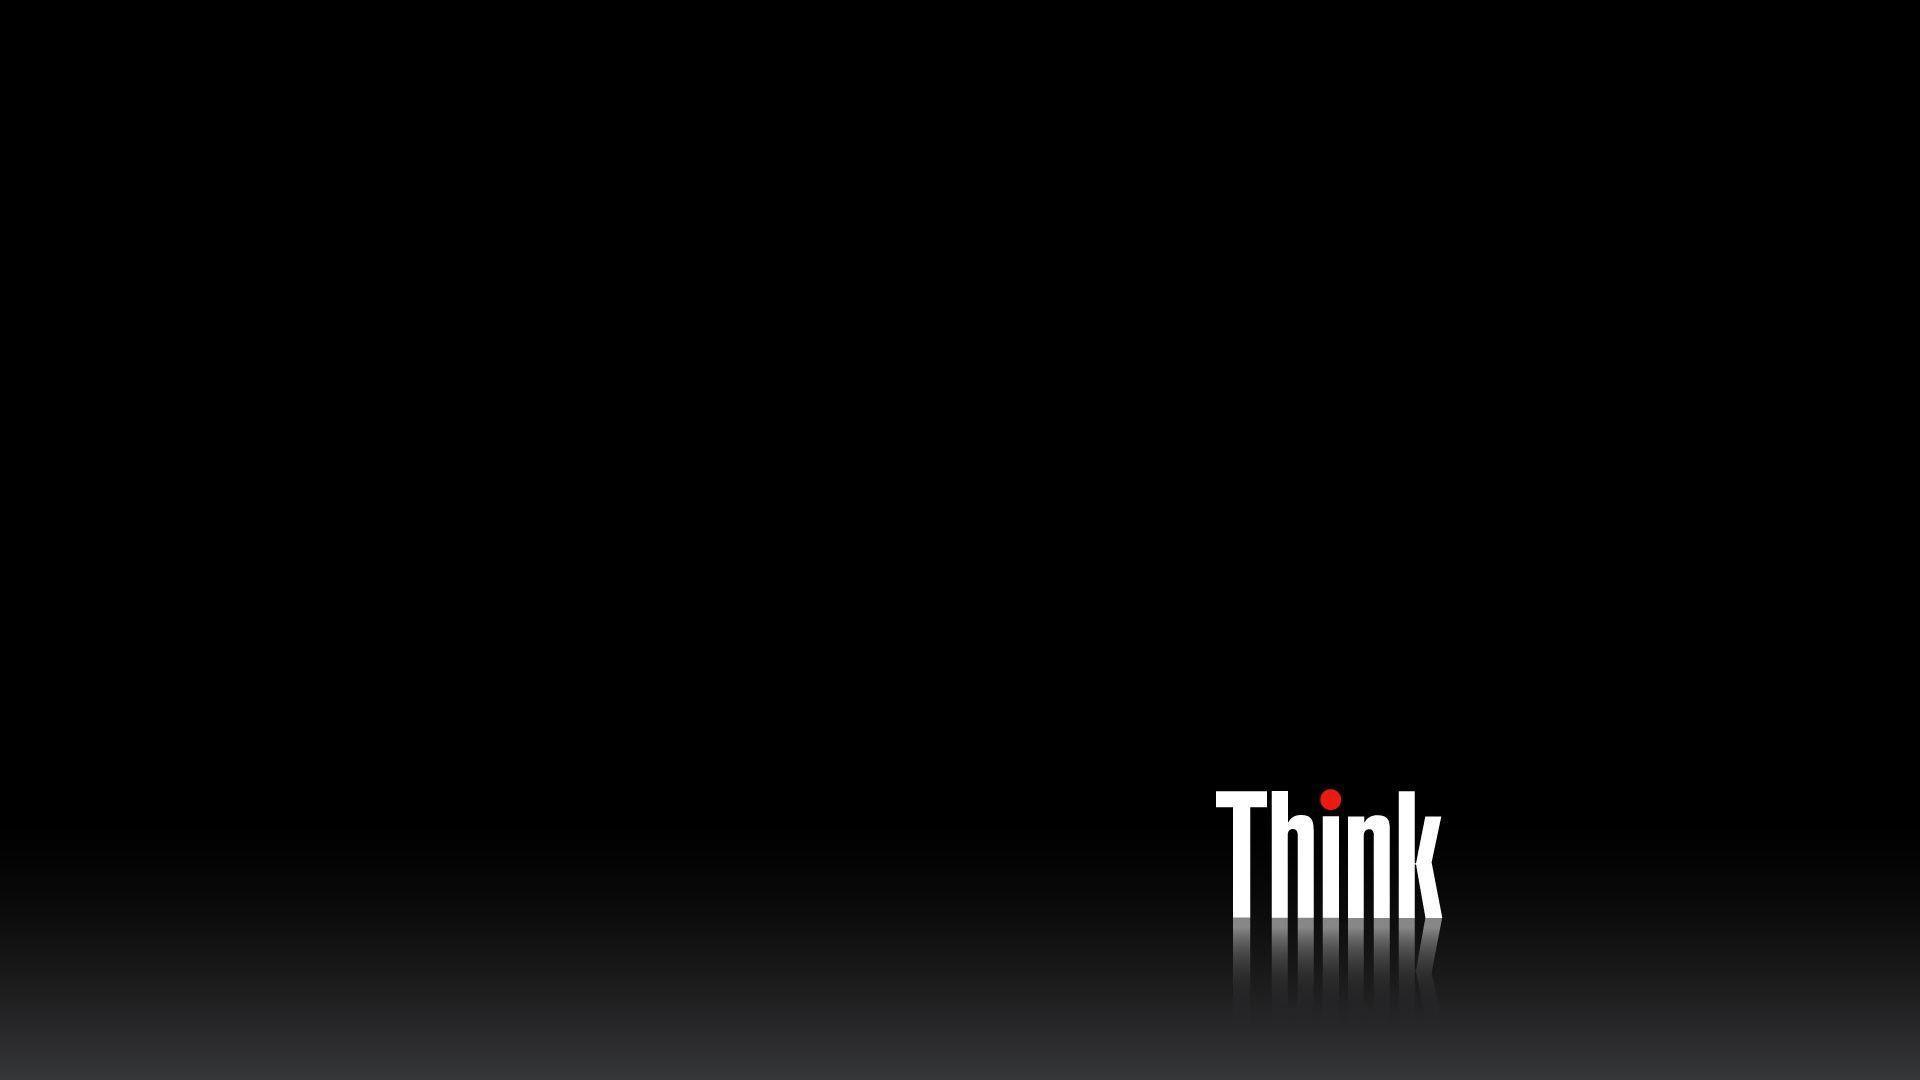 1920x1080 Think Black desktop PC and Mac wallpapers